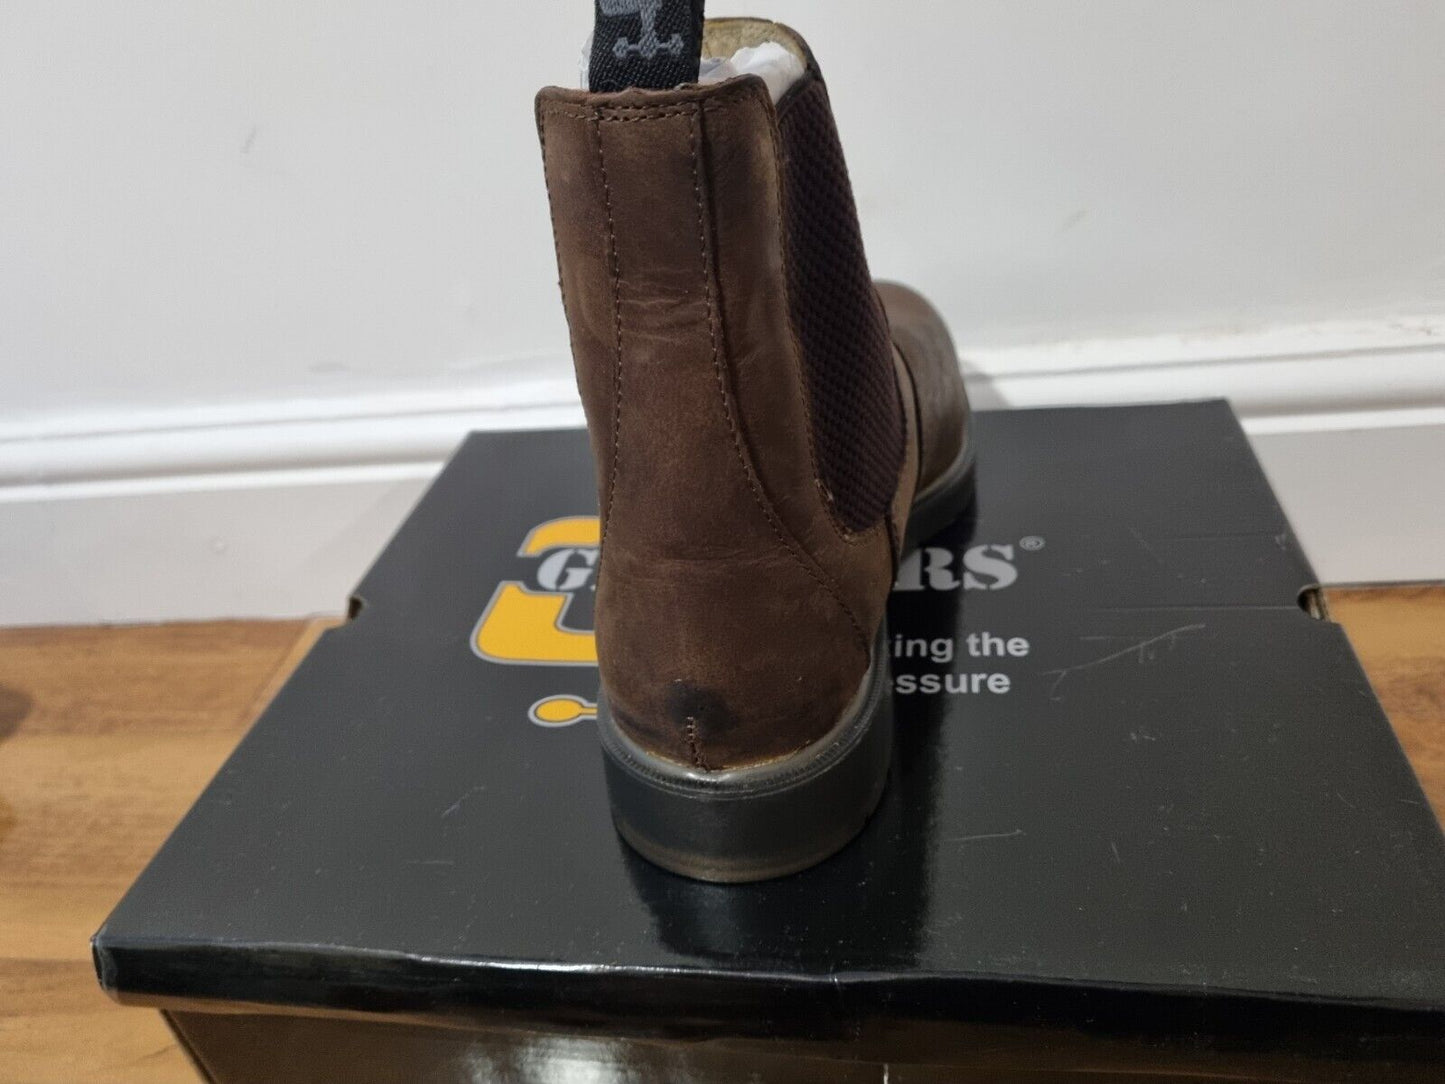 Chelsea Boot by Grafters - Crazy Horse Waxy Brown Leather (M186WB)